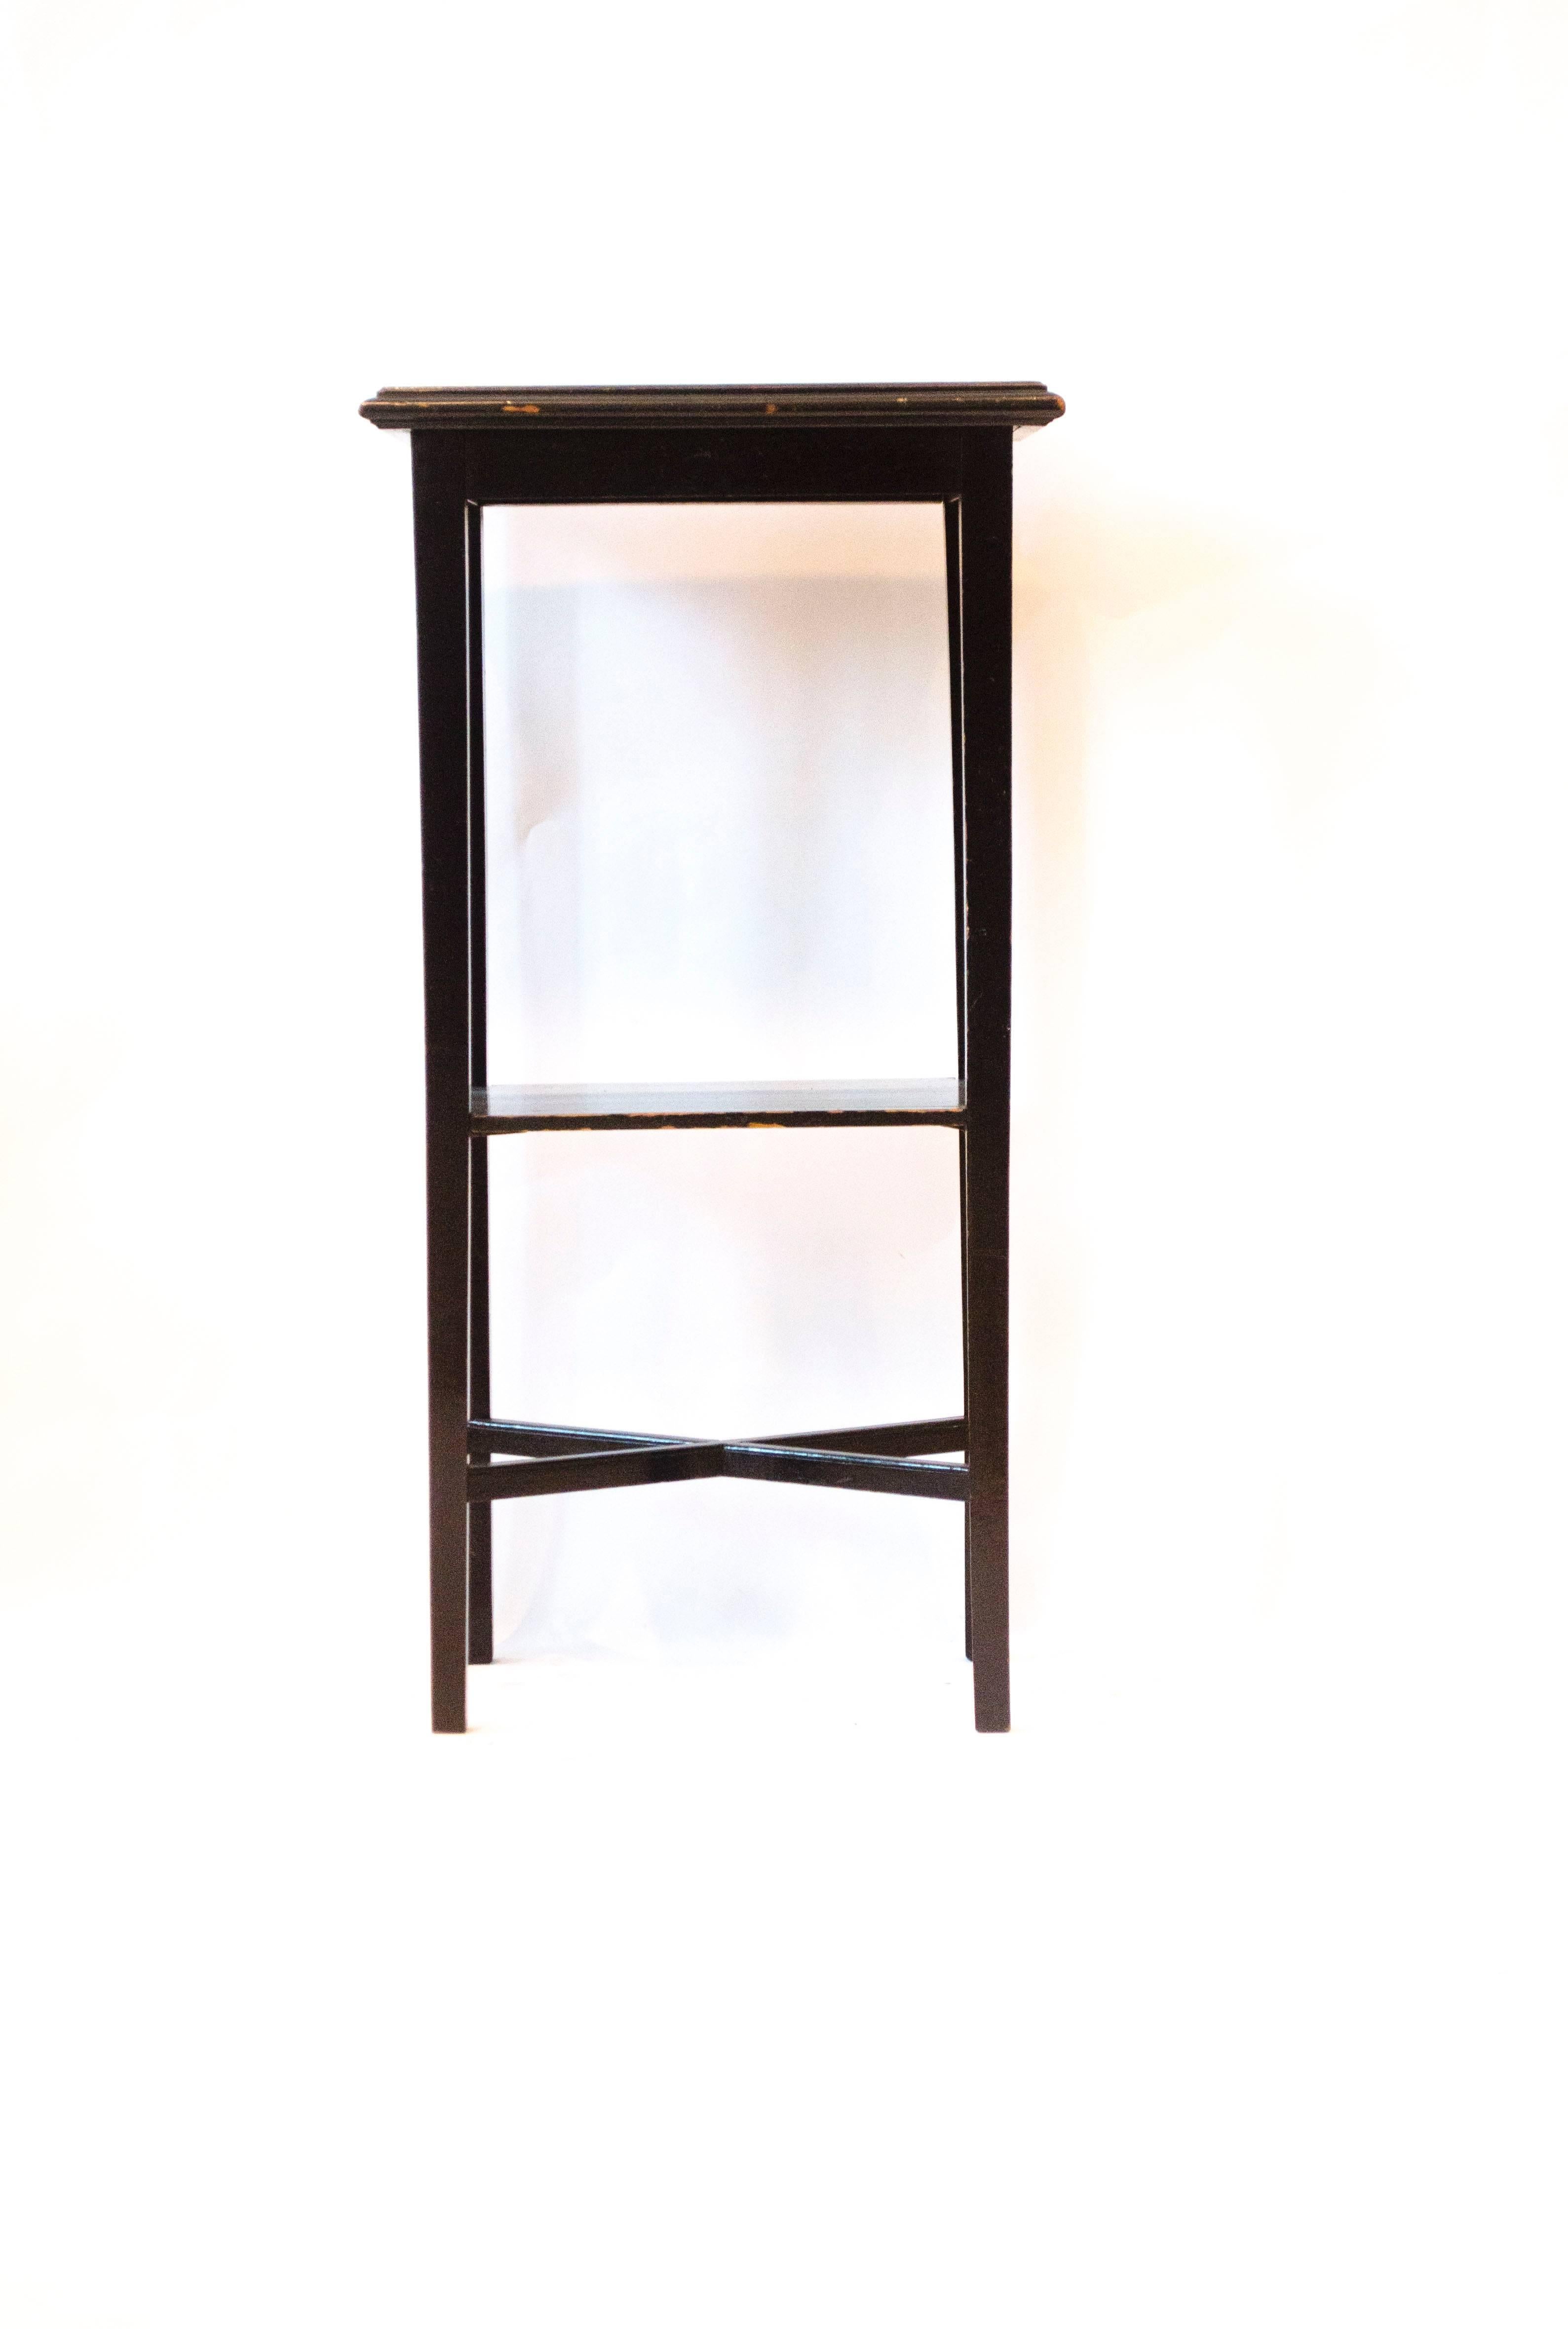 Aesthetic movement style floral tile-top ebonised side table. The tile has a fine crack running through it.